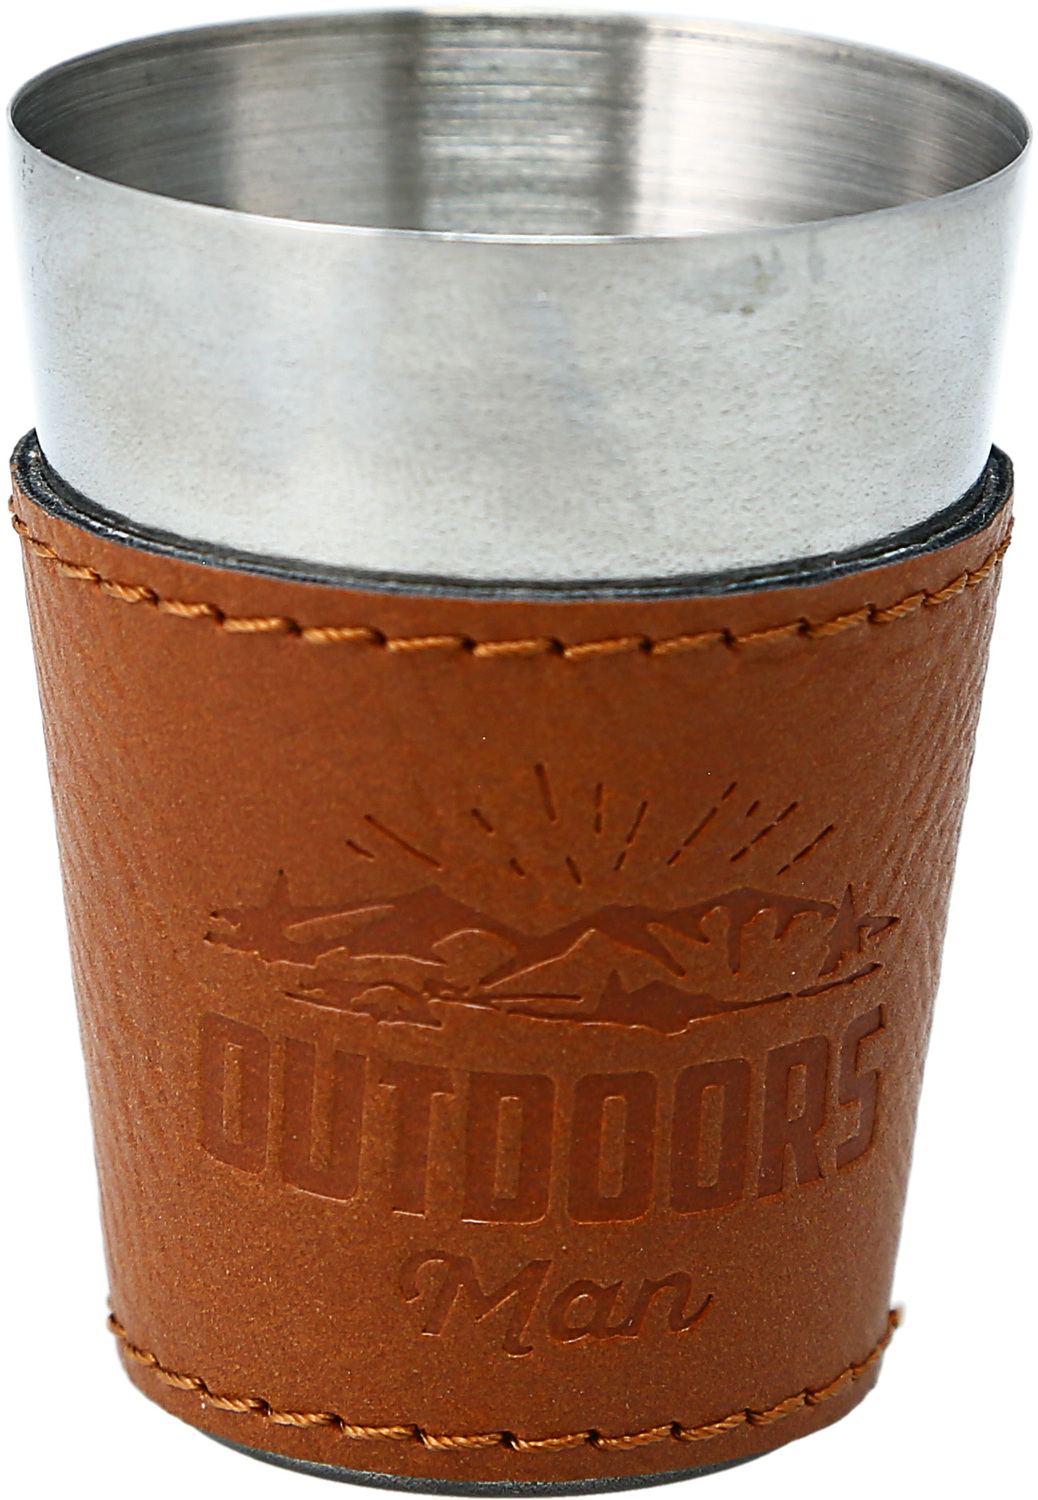 Outdoors Man by Man Out - Outdoors Man - Stainless Shot Glass with Sleeve